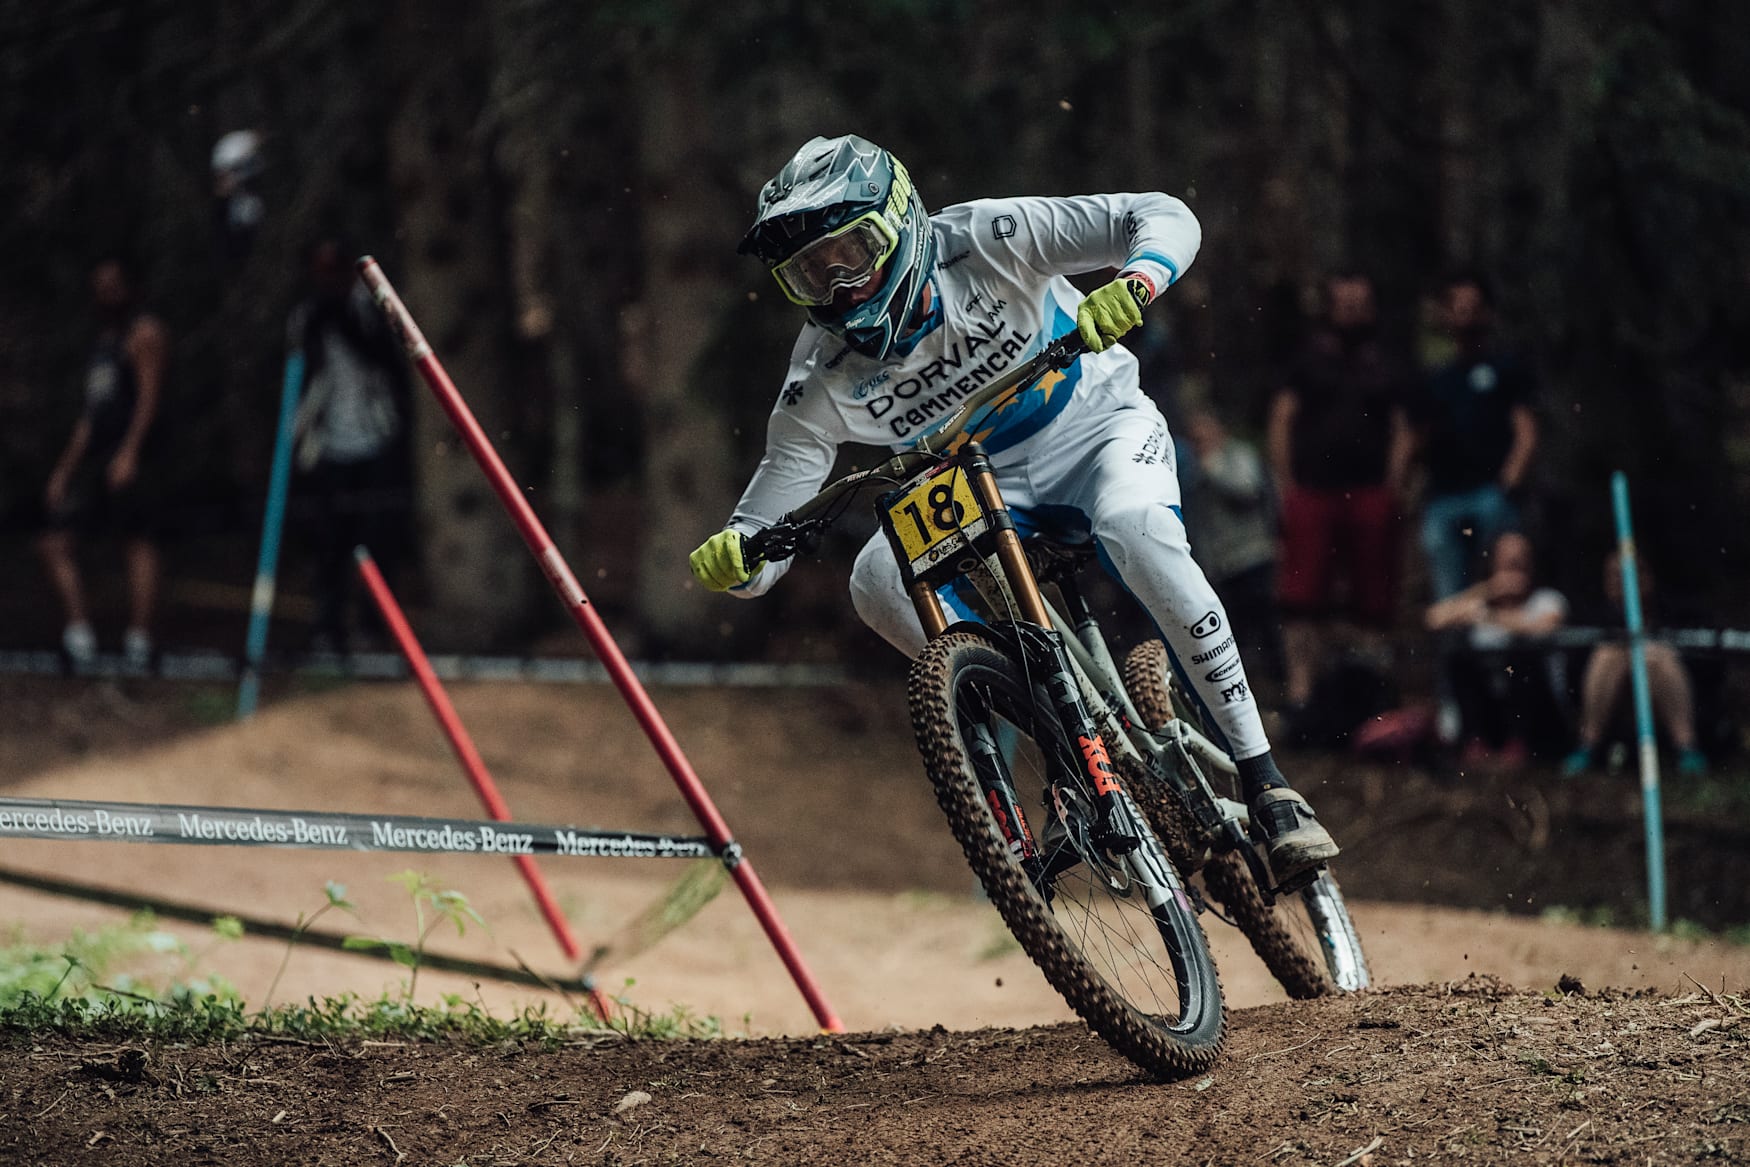 Baptiste Pierron rides during finals at the UCI MTB Downhill World Cup at Les Gets, France, on July 3, 2021.